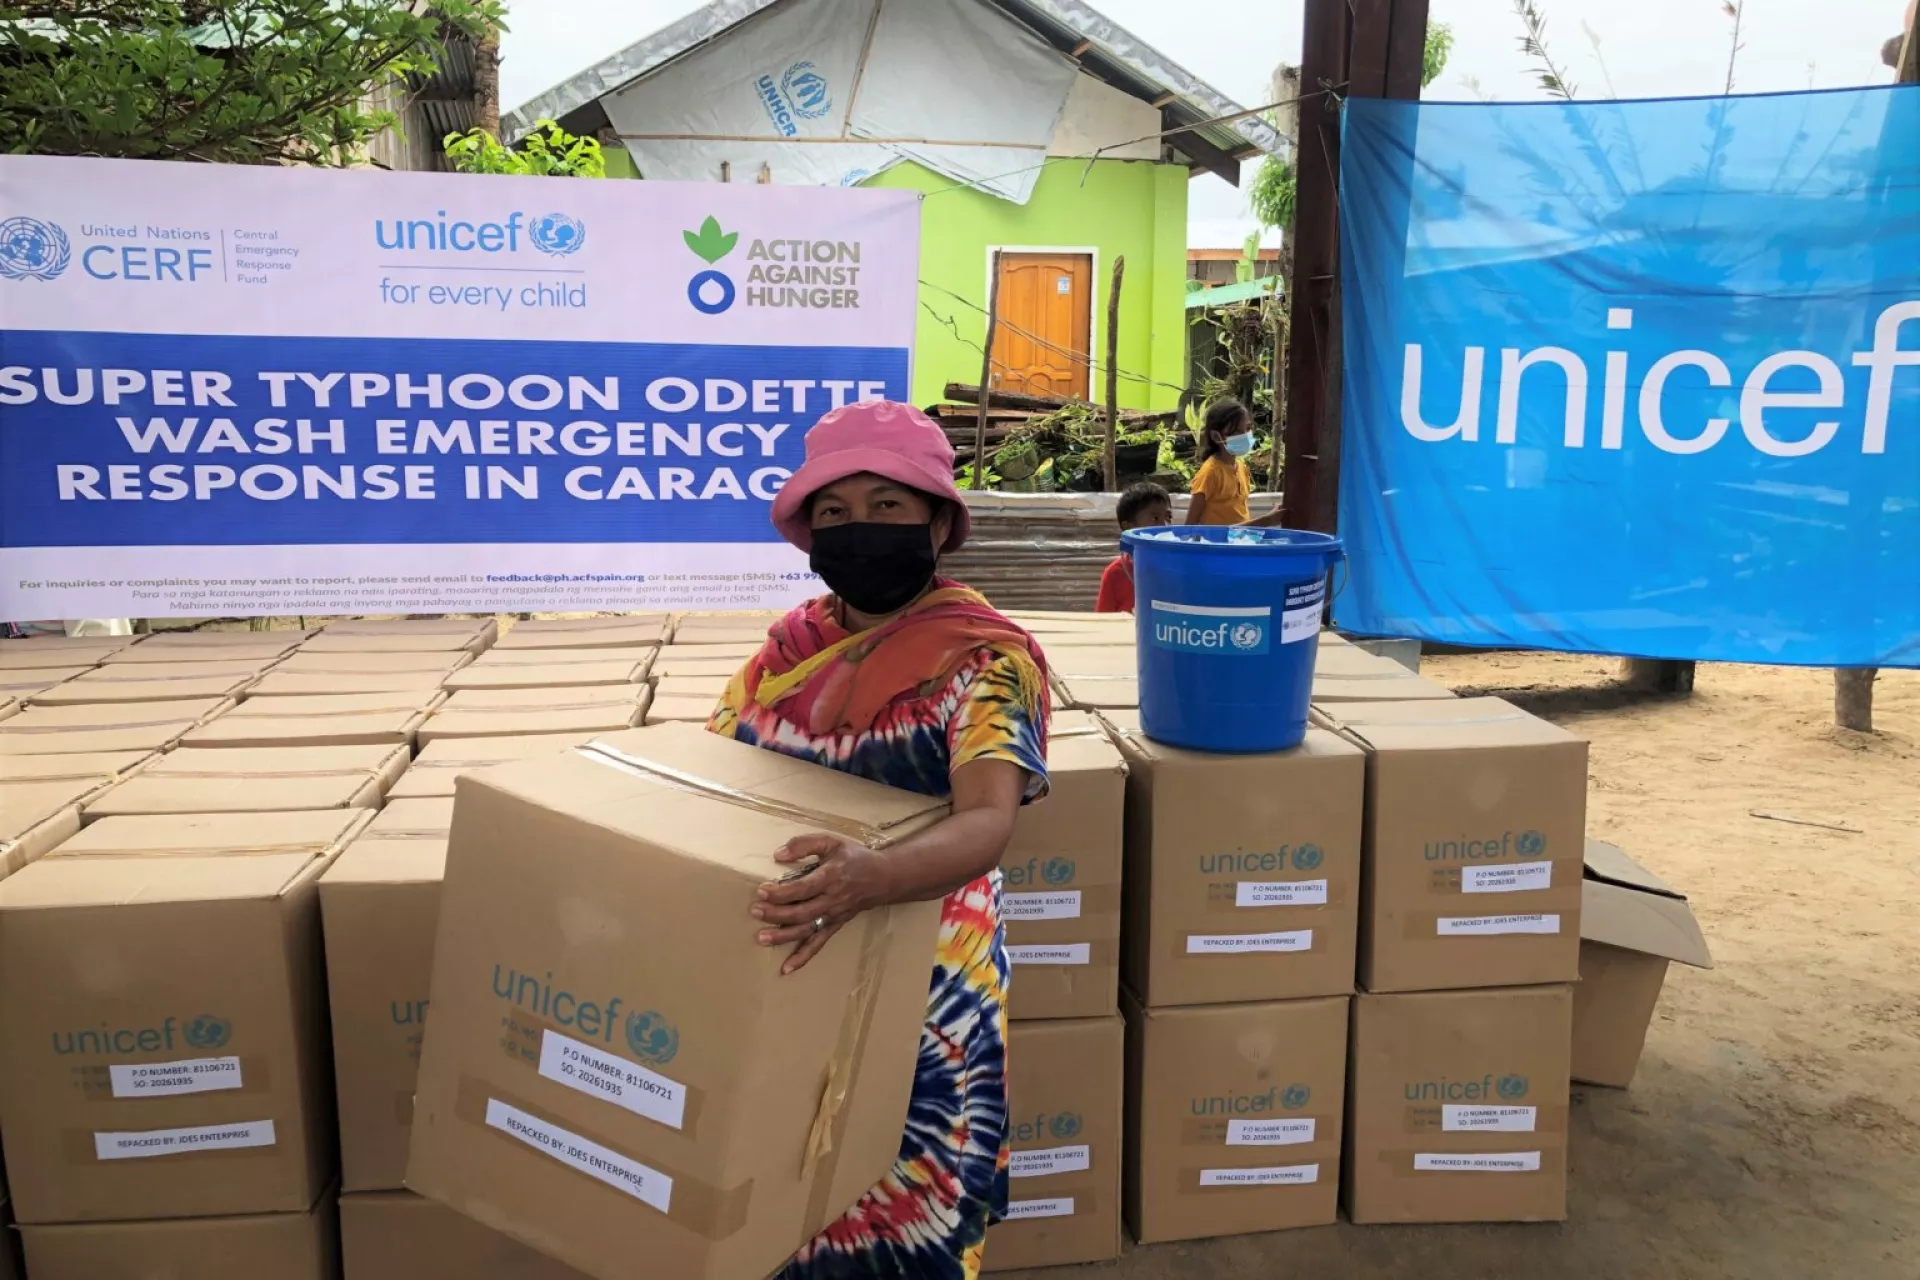 UNICEF and Action Against Hunger Philippines are providing WASH supplies for most affected families in Caraga